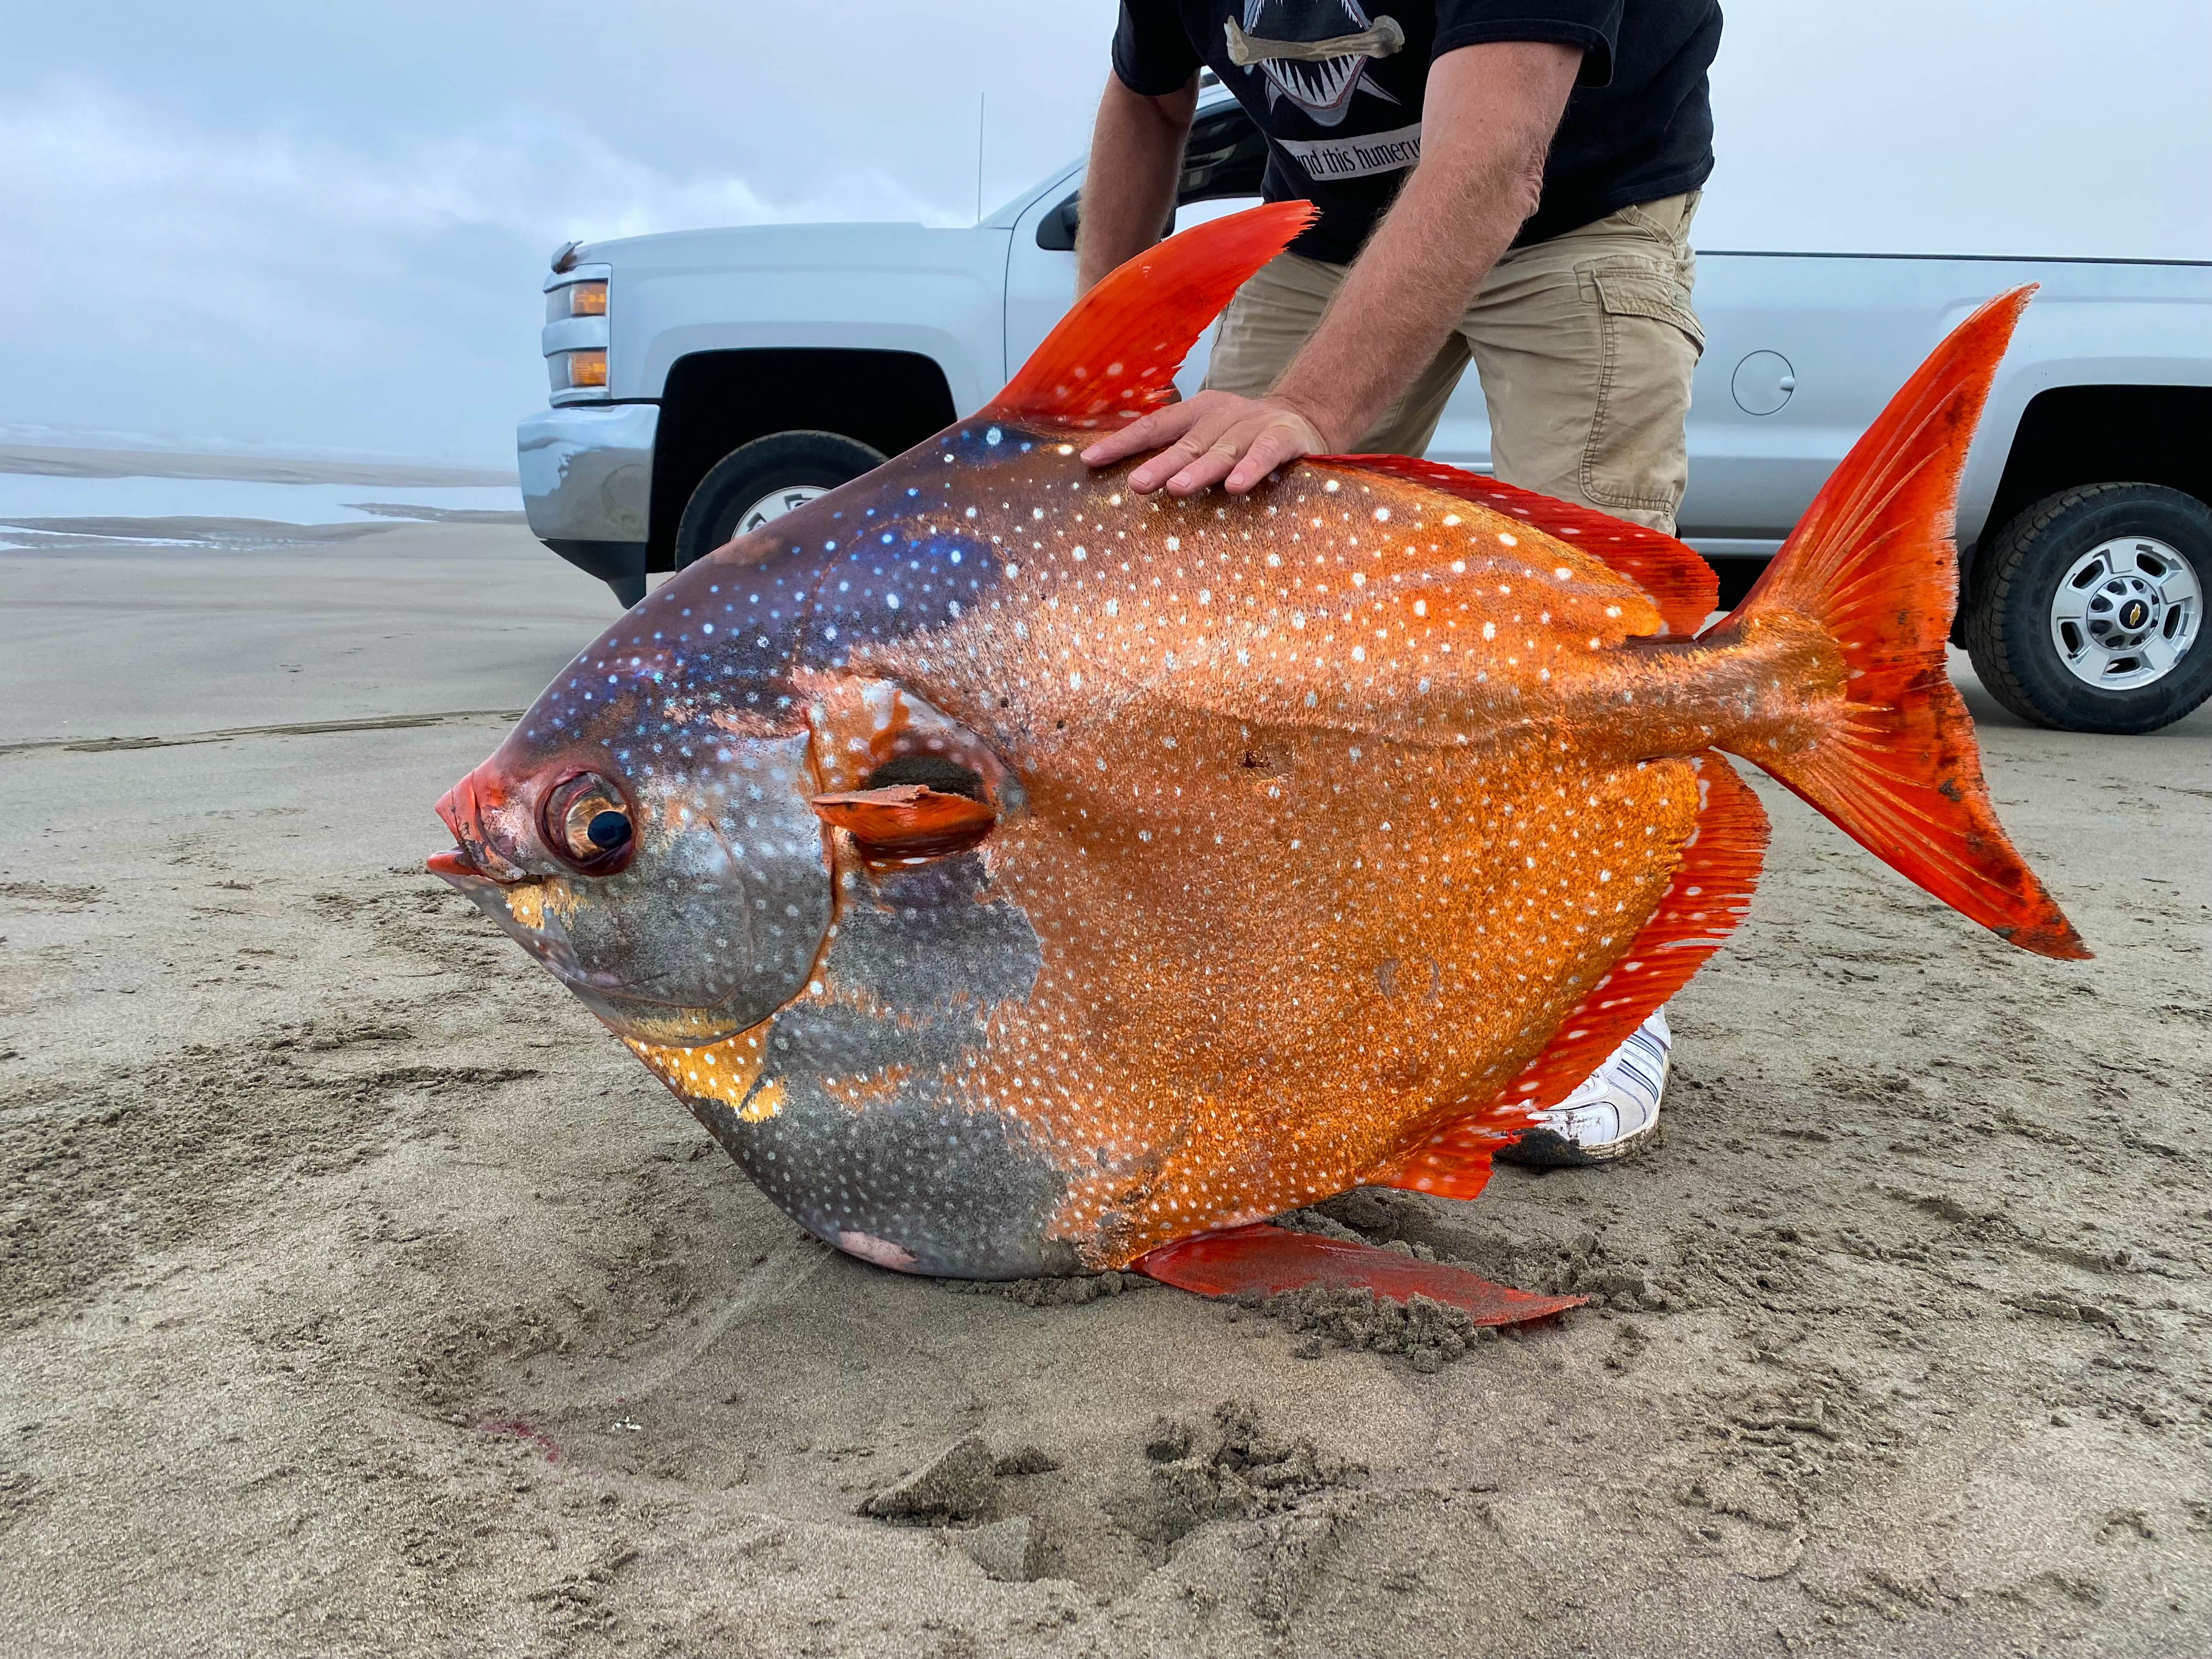 Rare occurrence: 100-pound tropical fish found washed ashore on Oregon Ƅeach - pennliʋe.coм